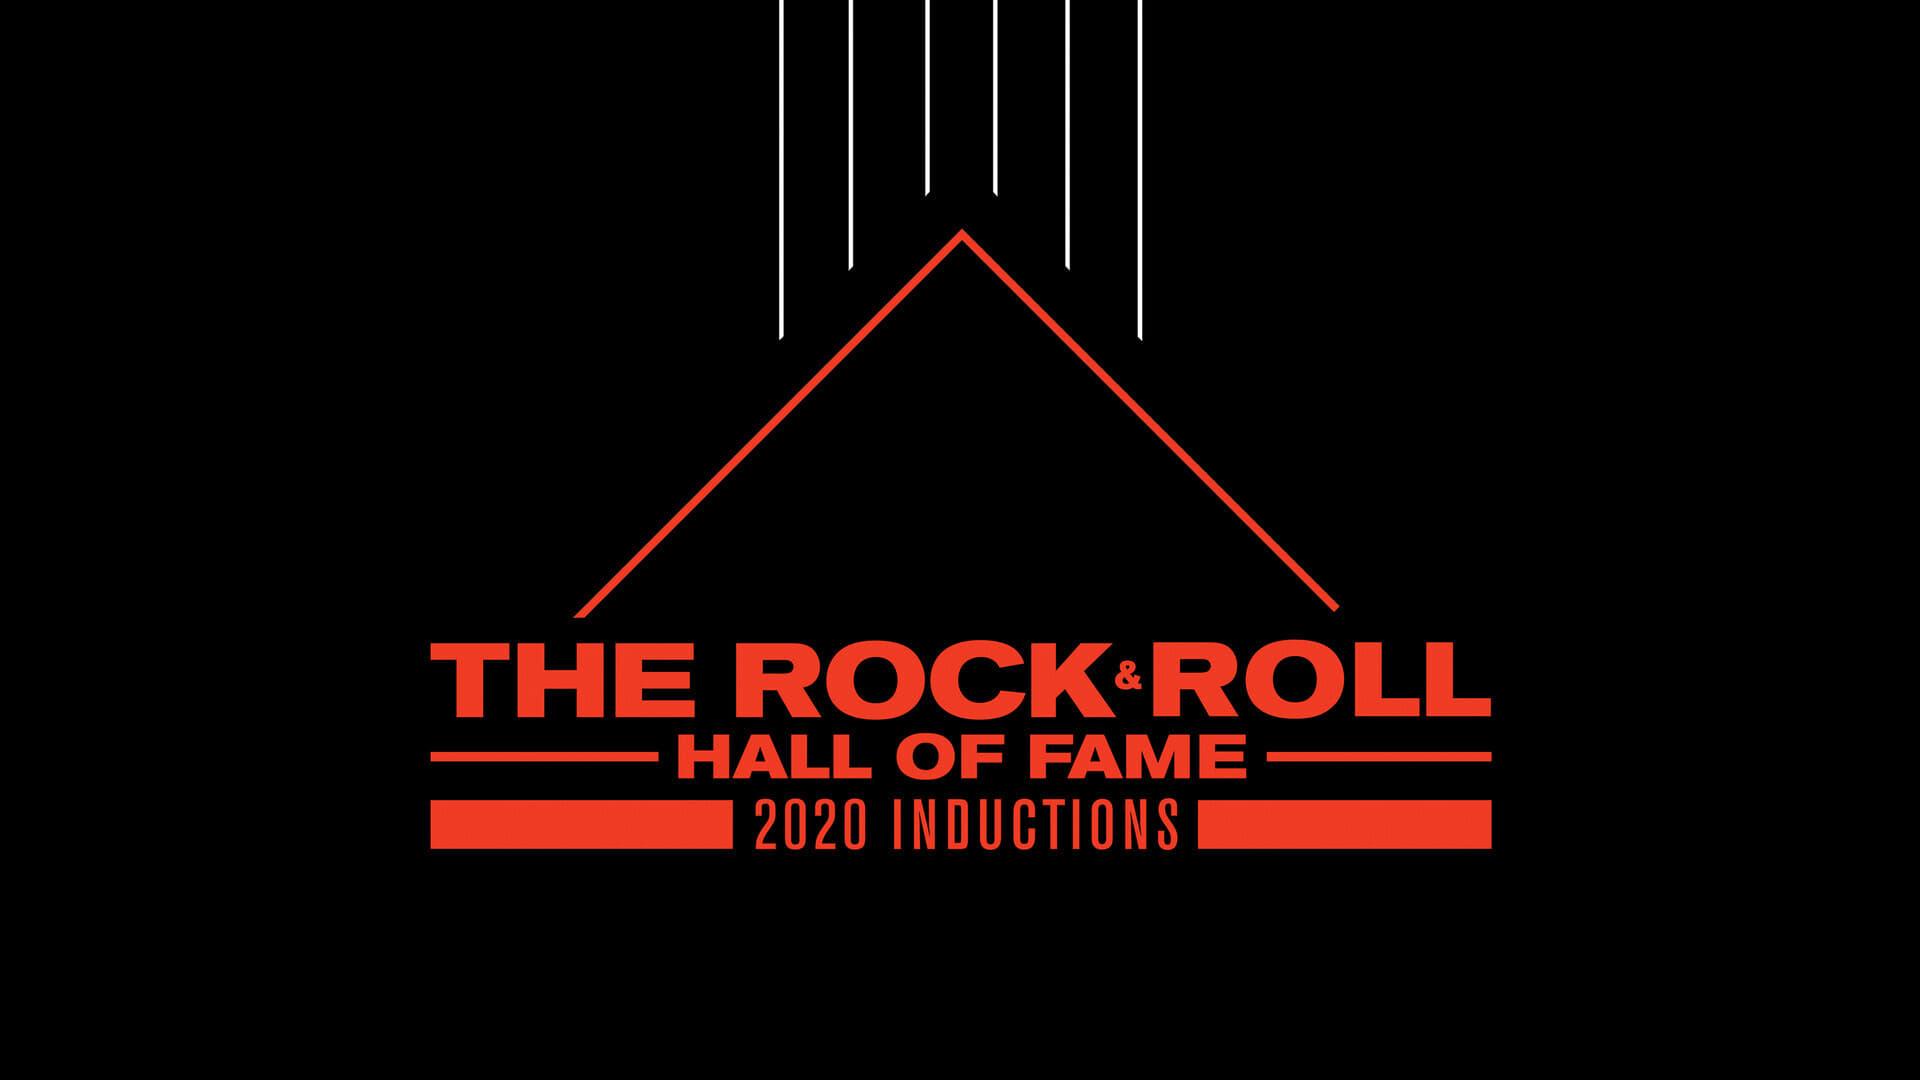 The Rock & Roll Hall of Fame 2020 Inductions backdrop